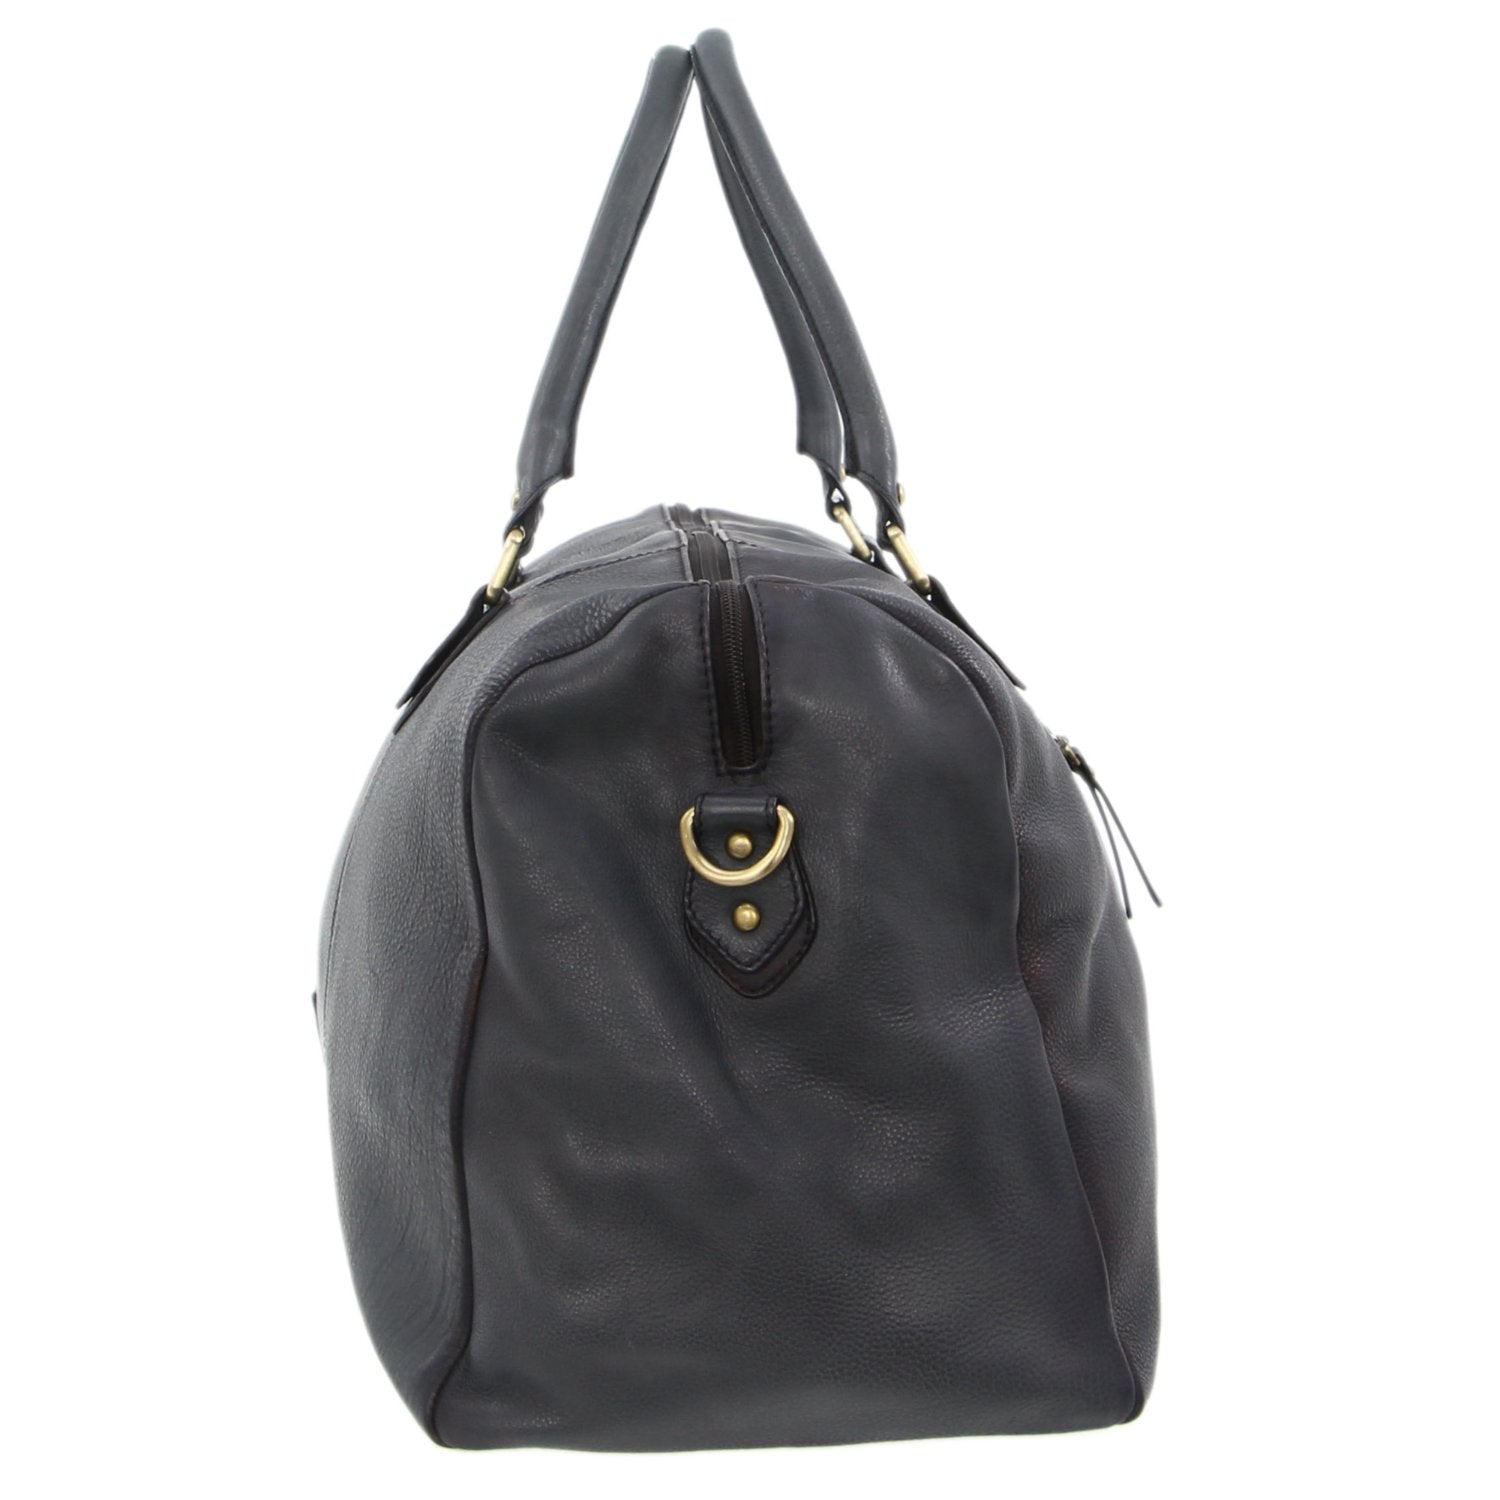 Pierre Cardin Smooth Leather Overnight Bag in Black